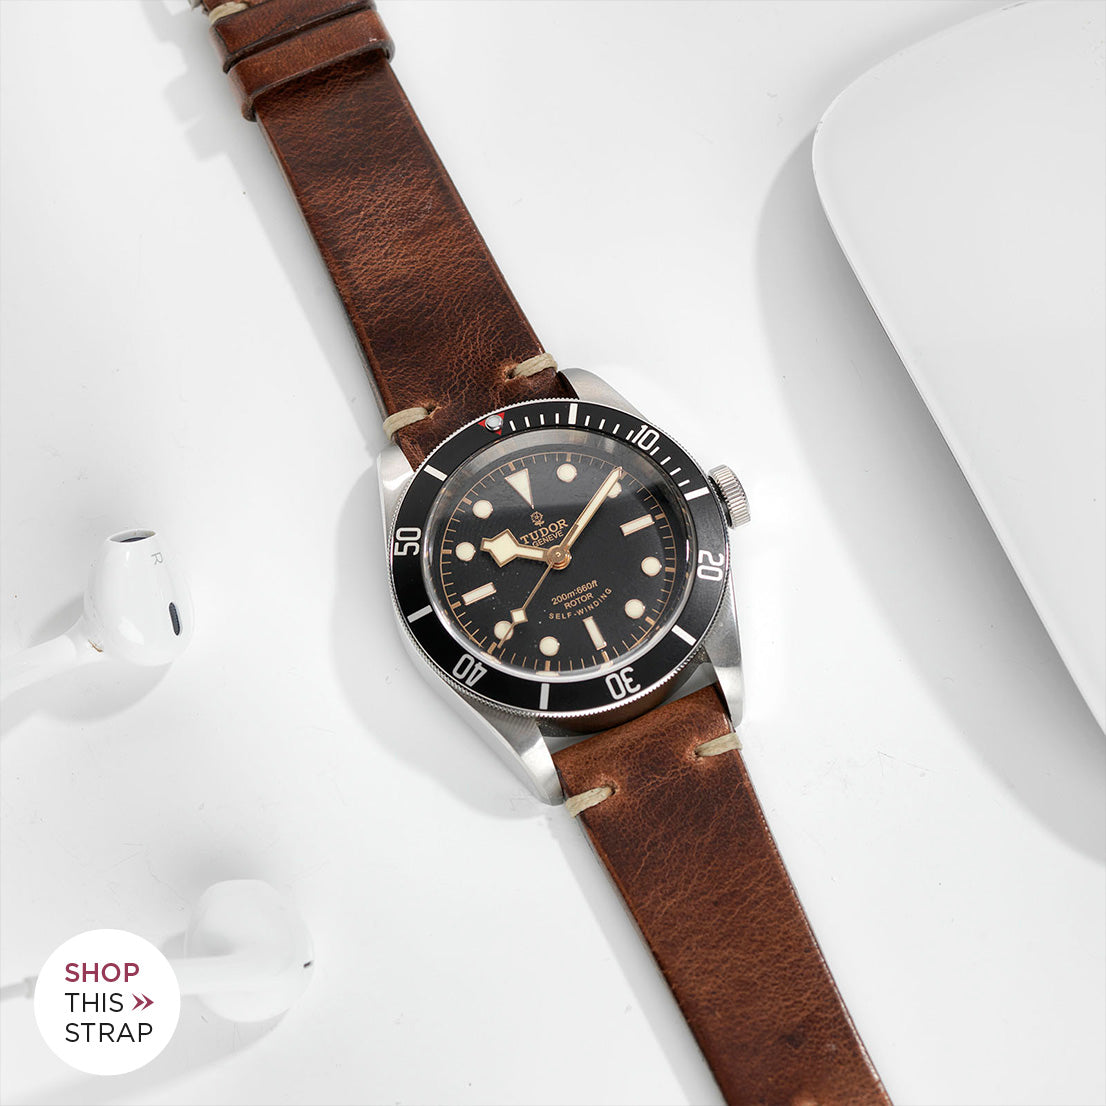 Bulang and Sons_Strap Guide_The Tudor Black Bay Black 79220N_Siena Brown Leather Watch Strap